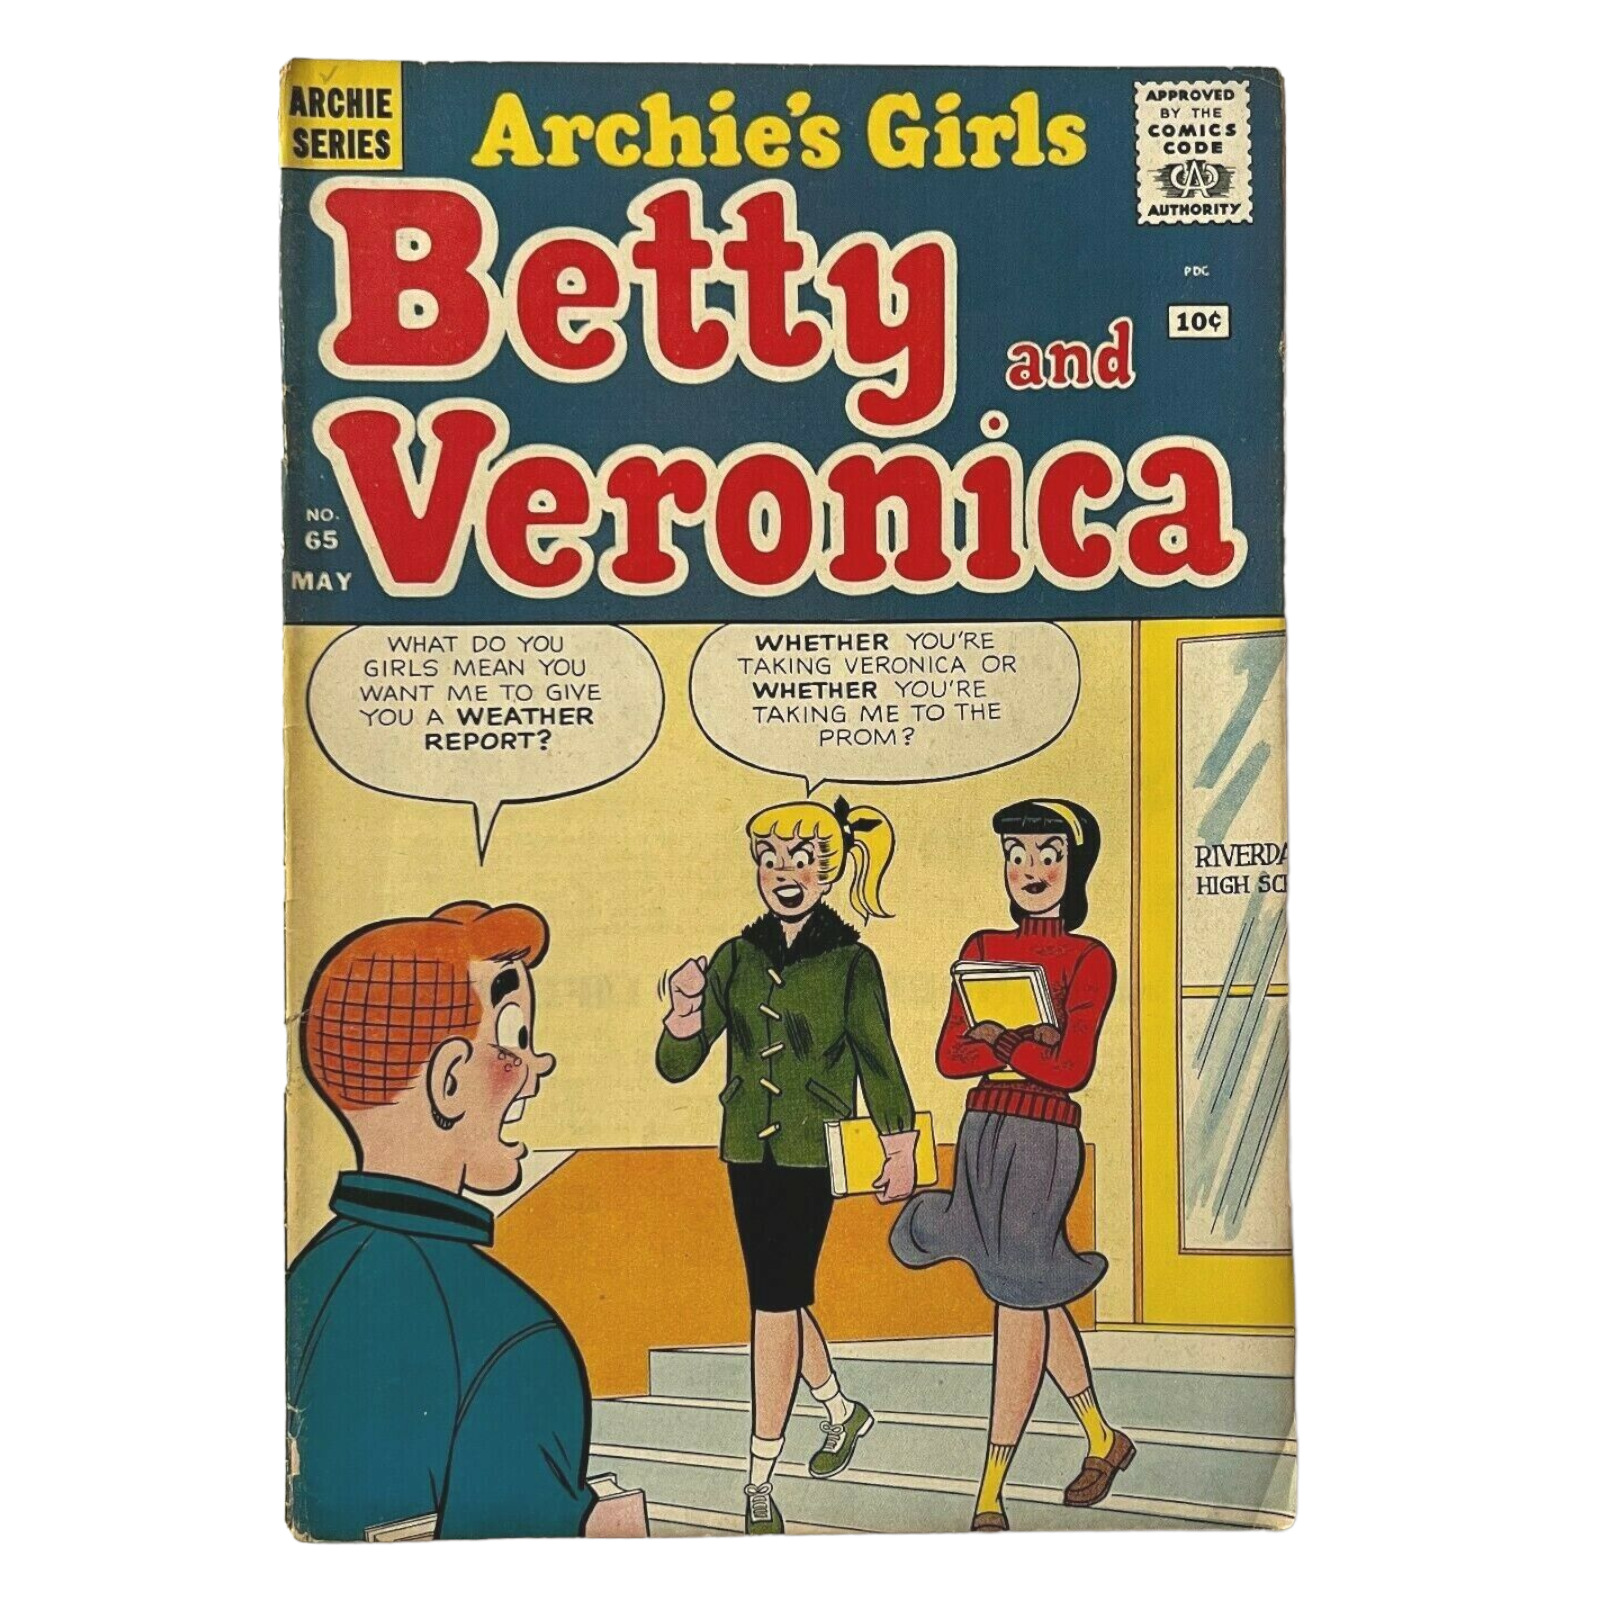 Archie Comics Archie\'s Girls BETTY And VERONICA #65  VTG Comic Book GGA